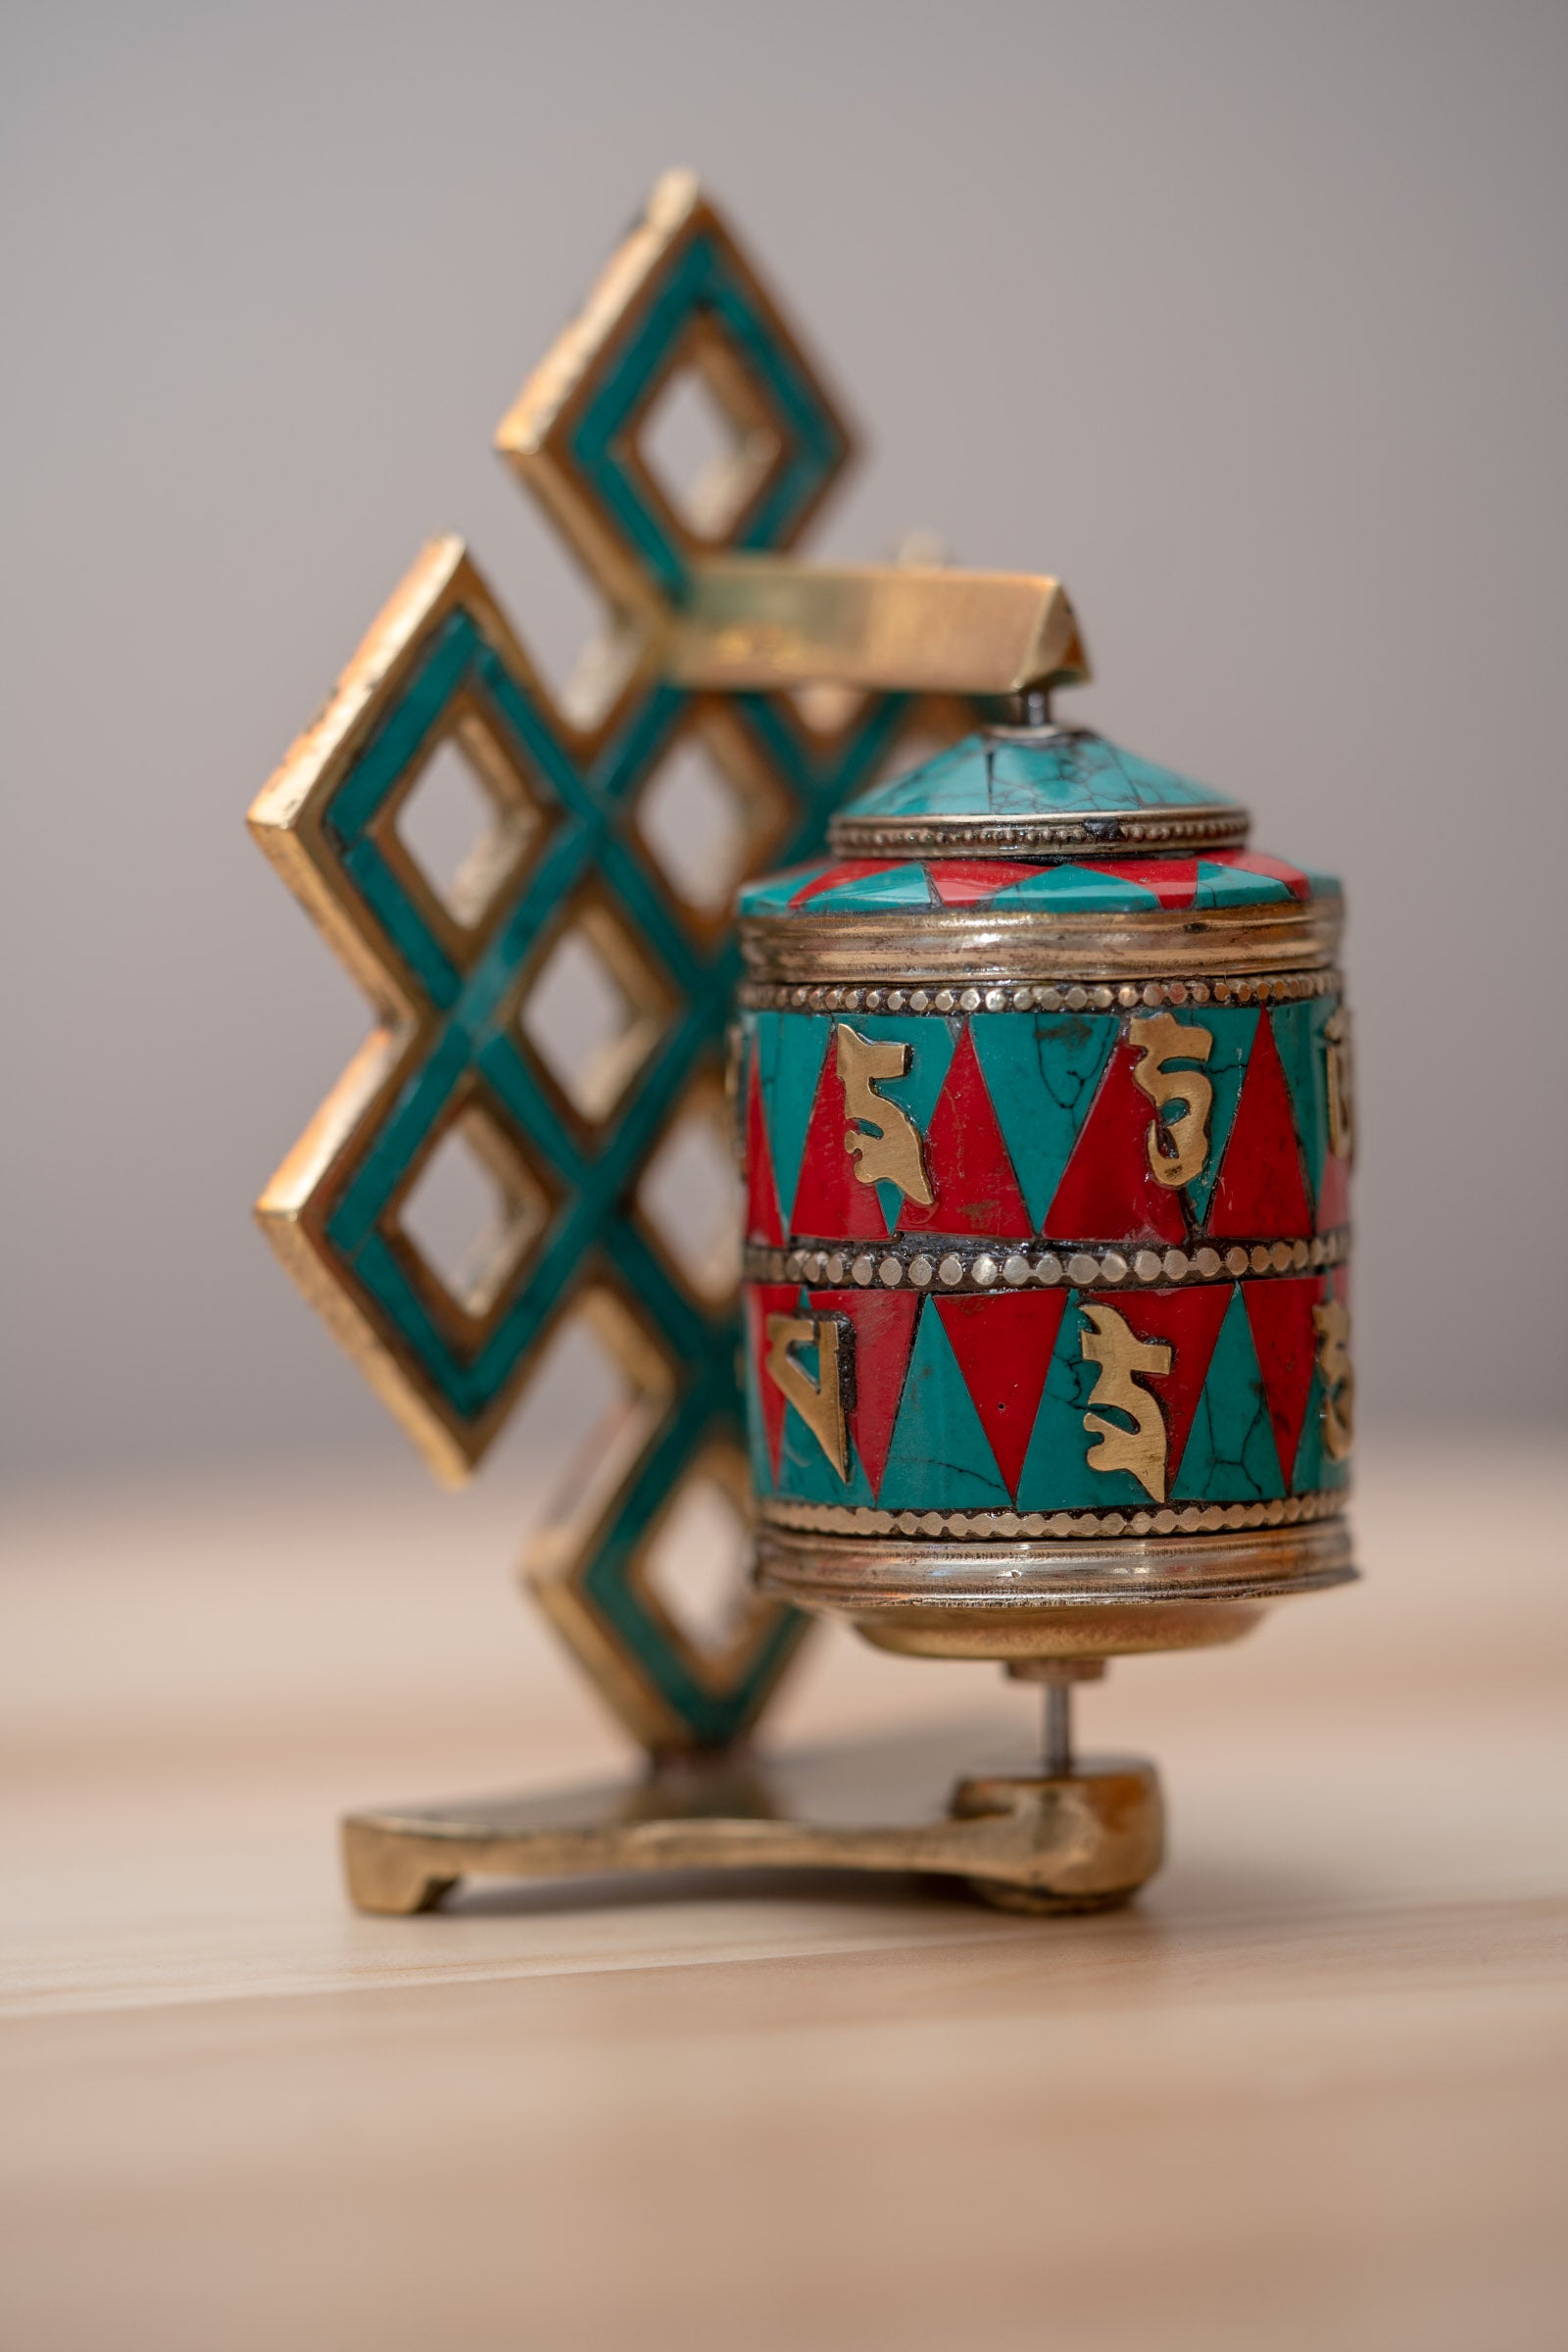 Endless Knot Prayer Wheel serves as a means to cultivate mindfulness and focus.